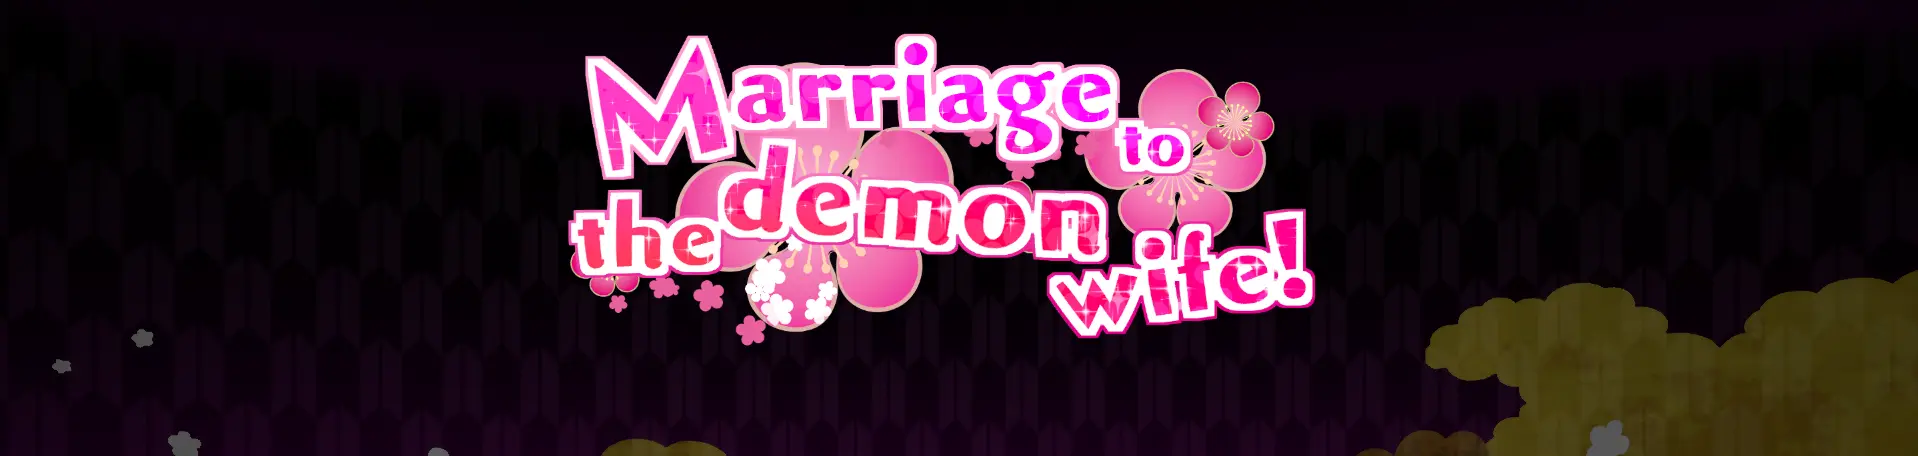 Marriage to the demon wife! main image